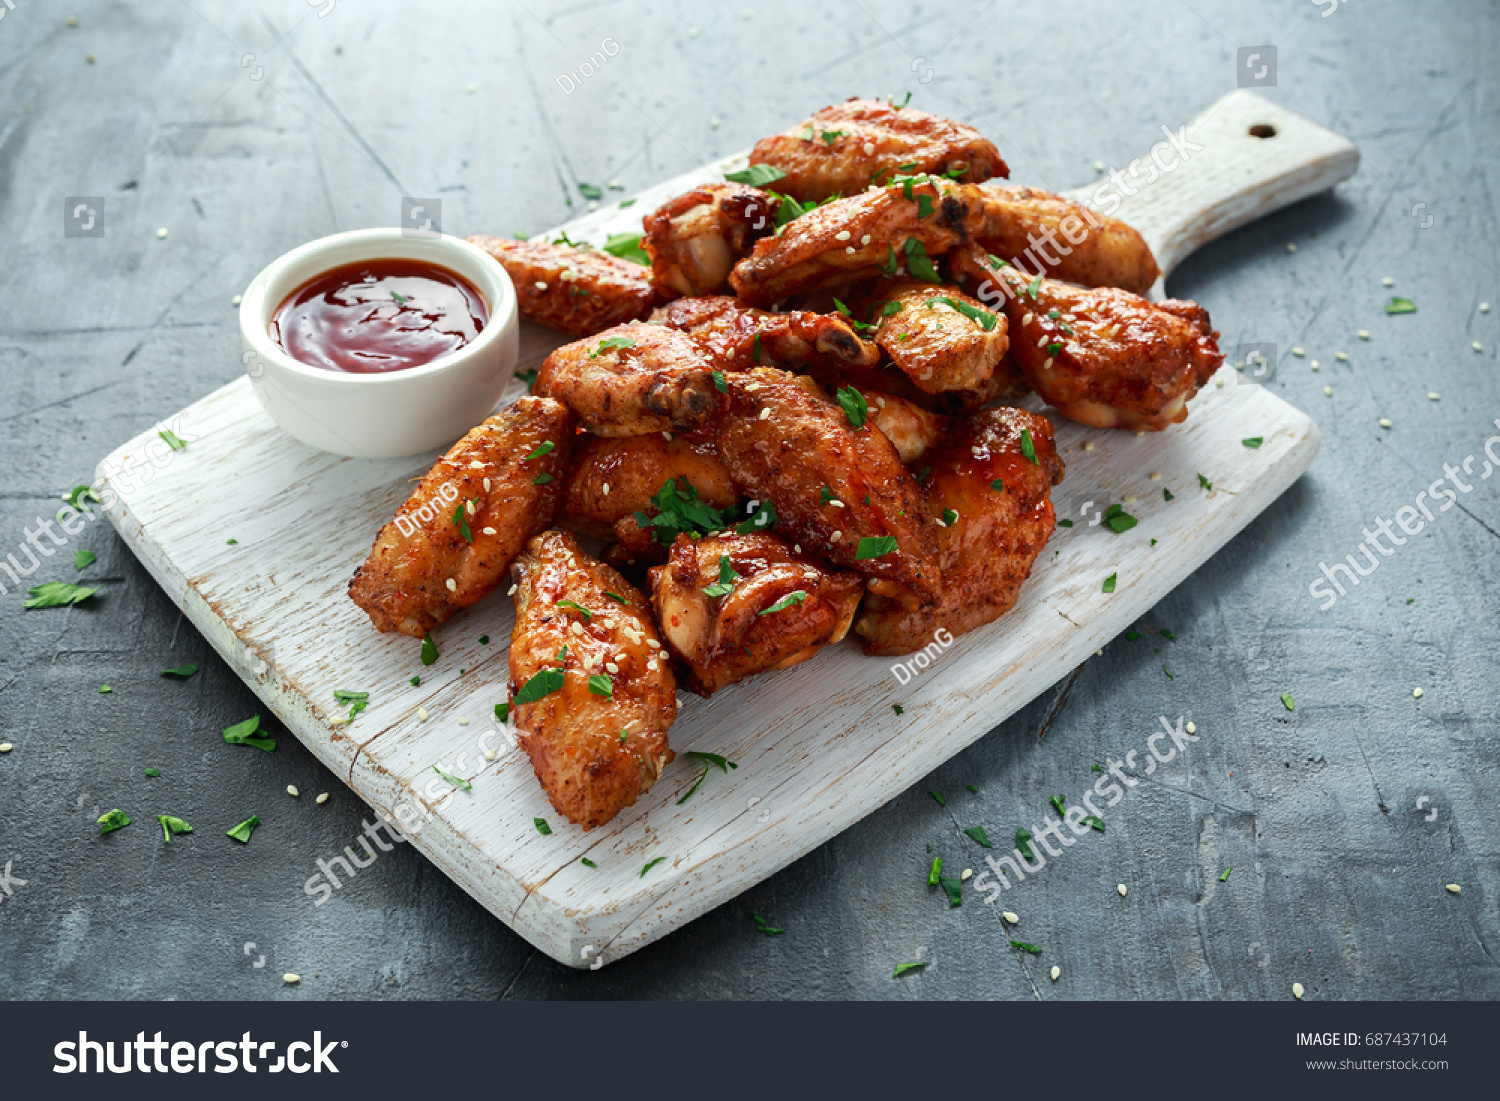 Baked chicken wings with sesame seeds and sweet chili sauce on white wooden board. #687437104